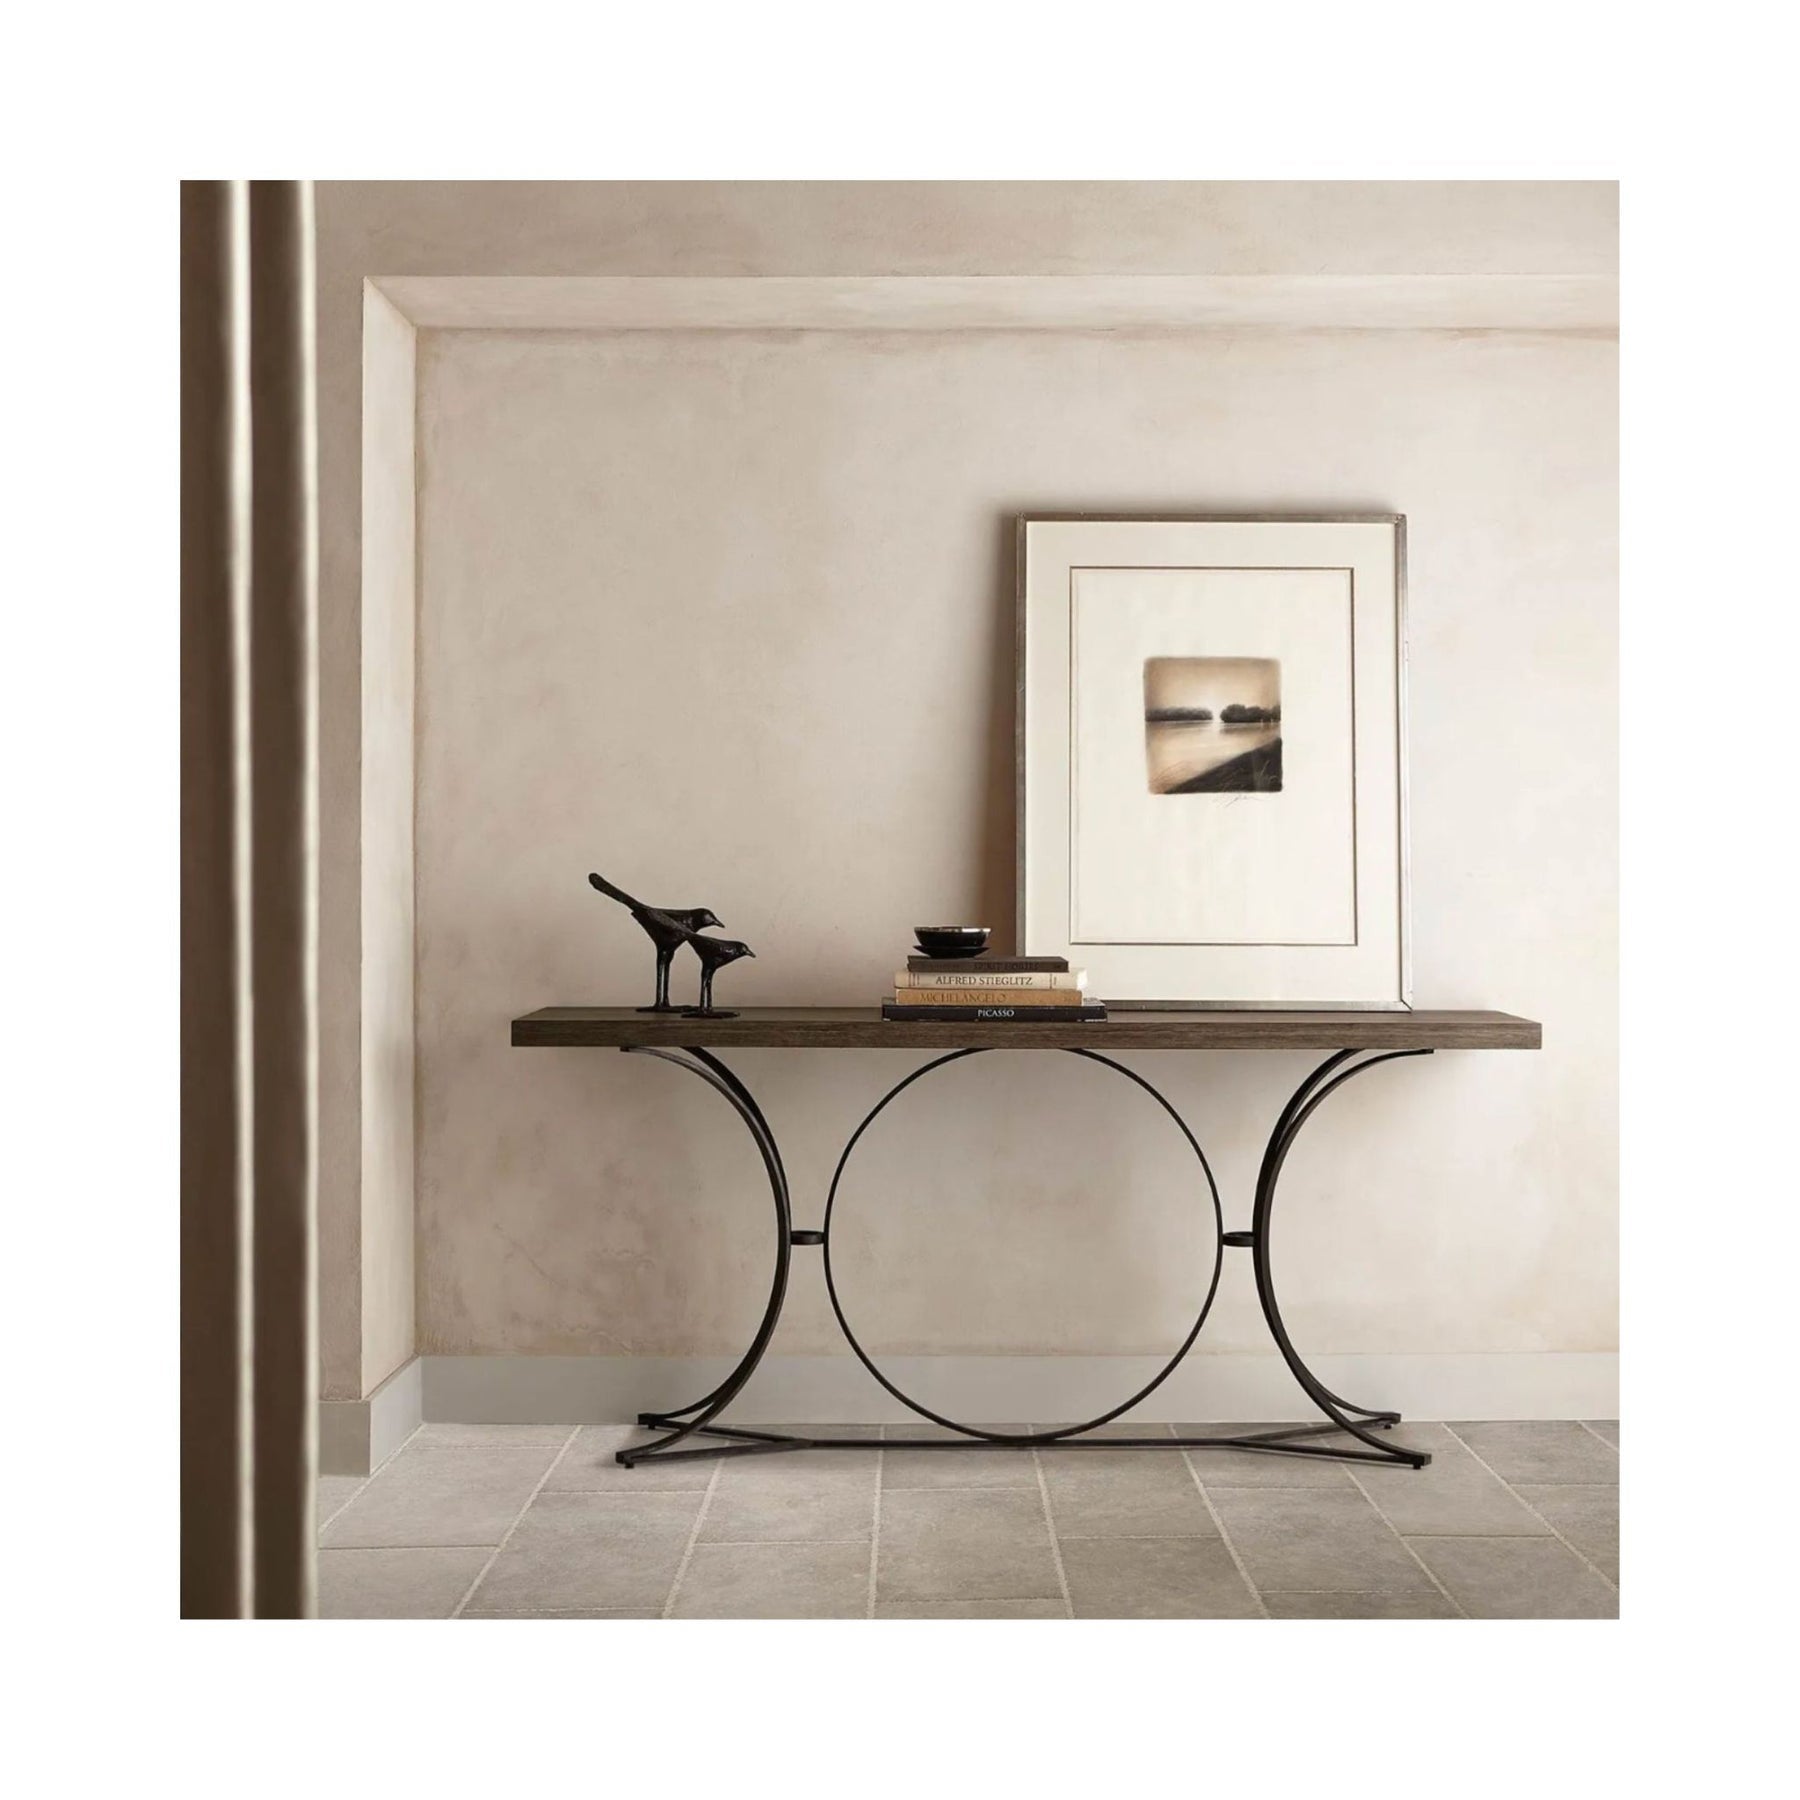 Console table with picture frame on top in a cream room